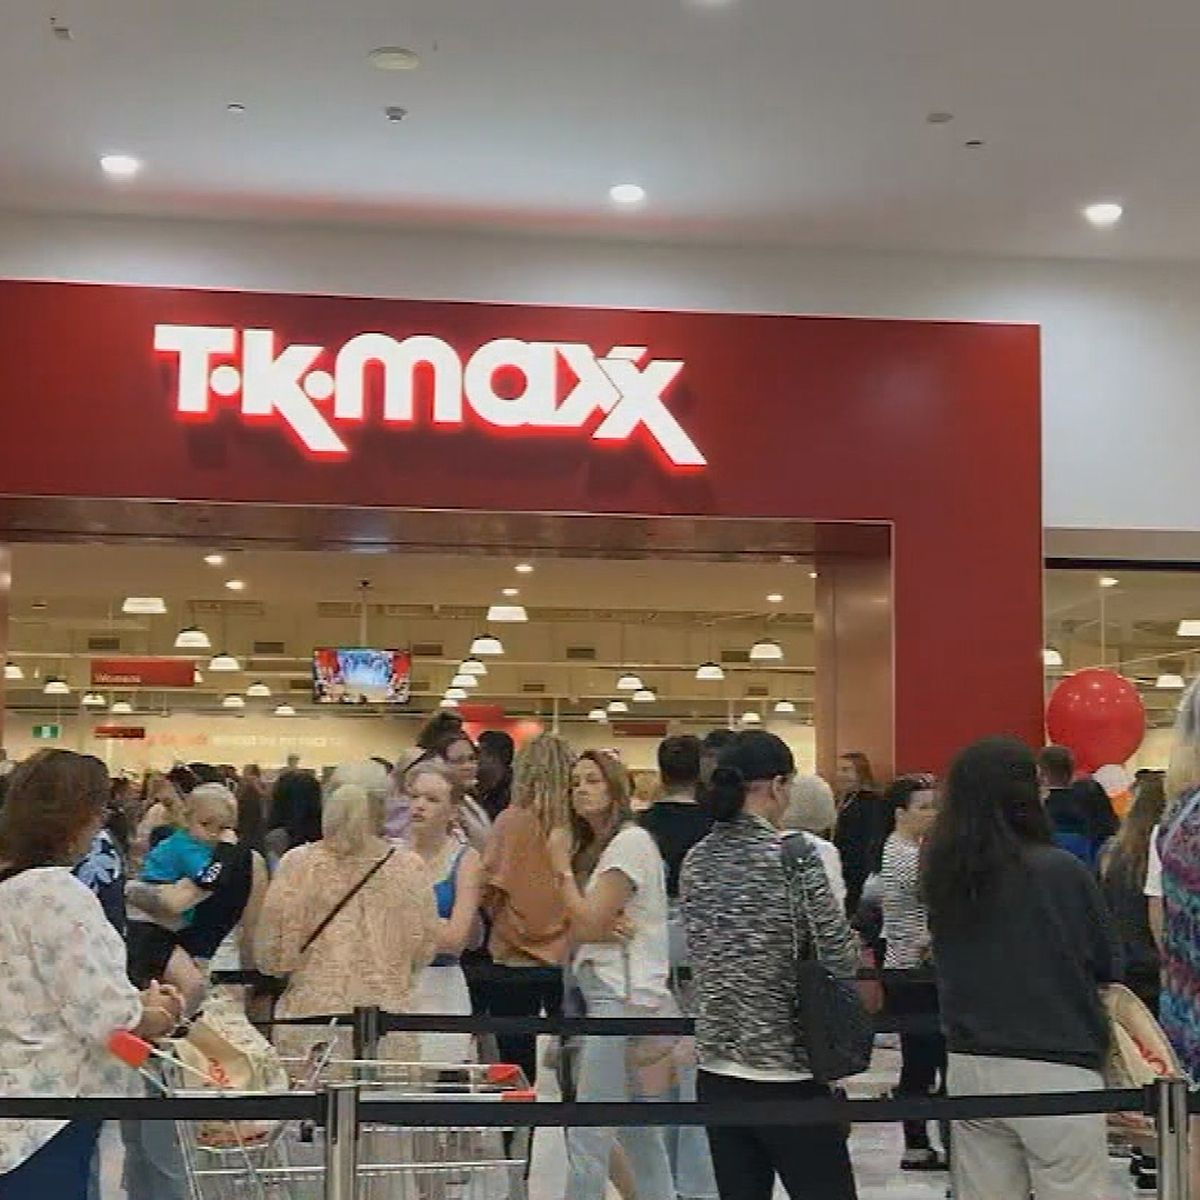 Perth news: TK Maxx mania takes over Perth as first store opens